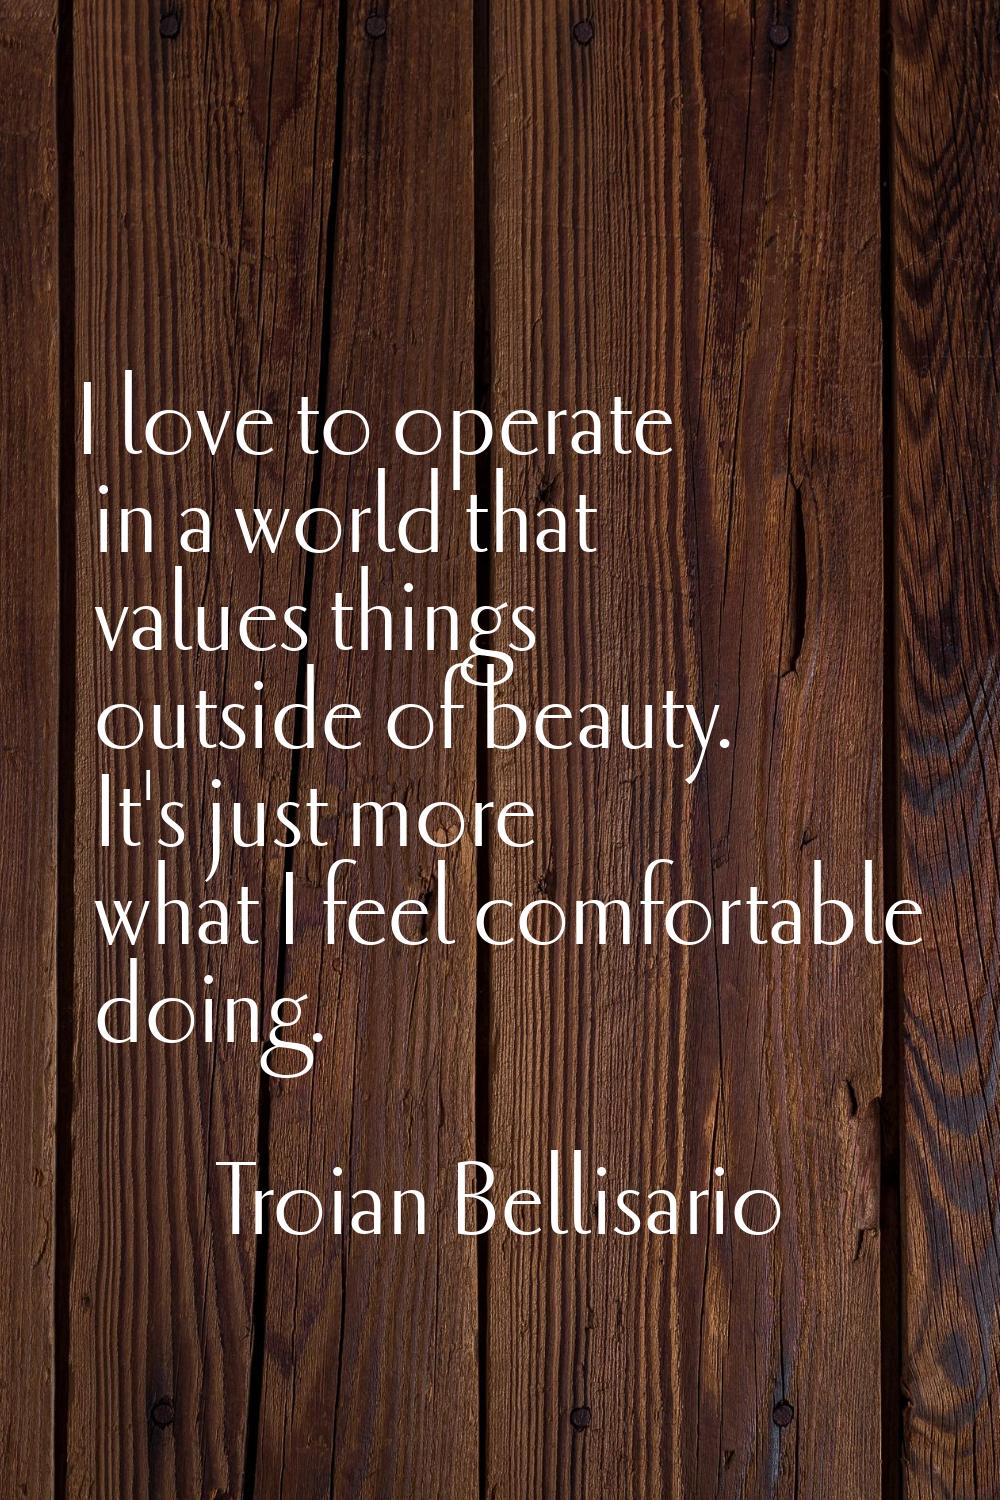 I love to operate in a world that values things outside of beauty. It's just more what I feel comfo